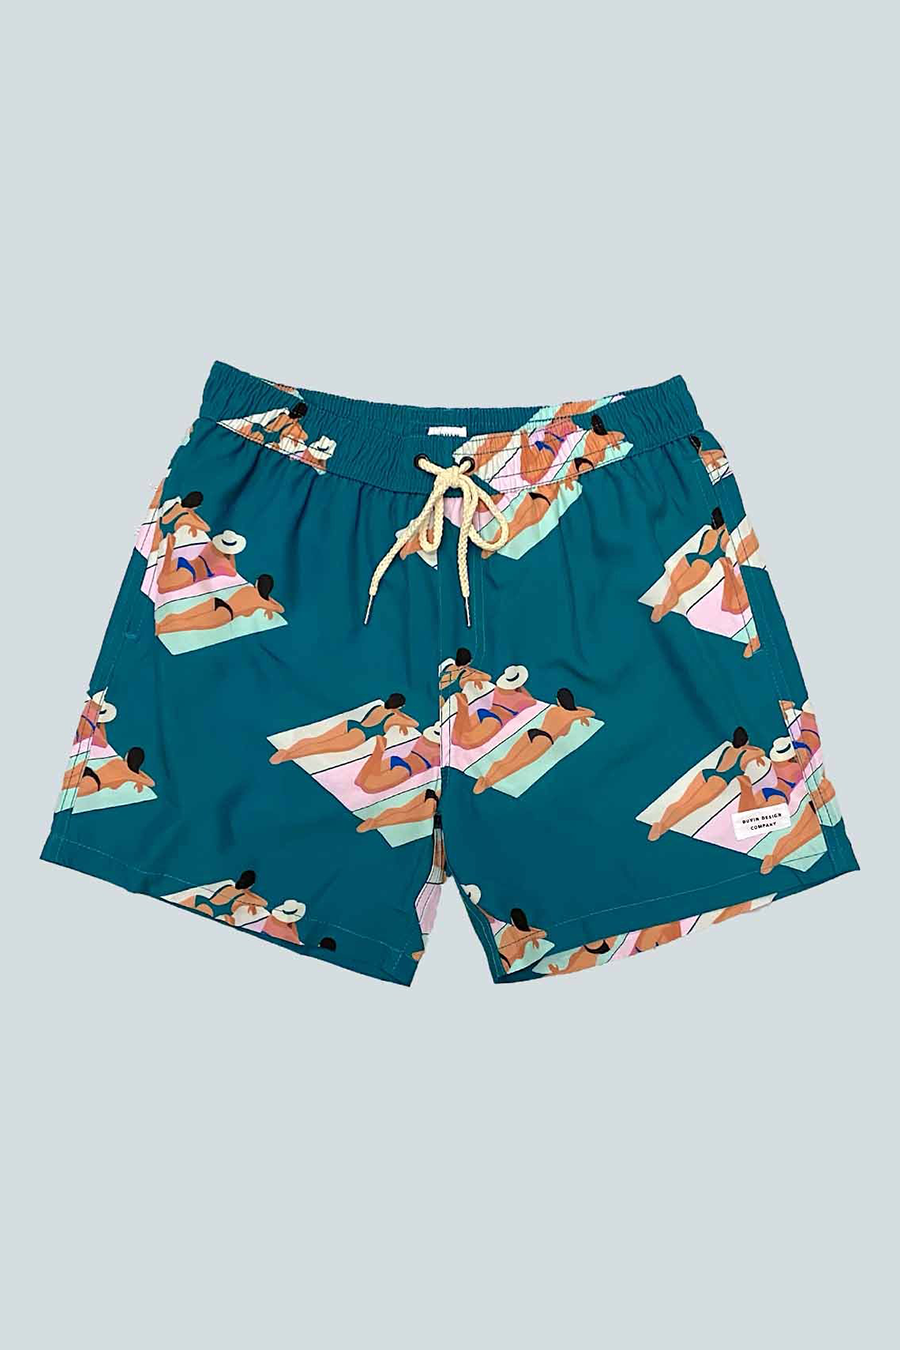 Tanning Co Short | Teal - West of Camden